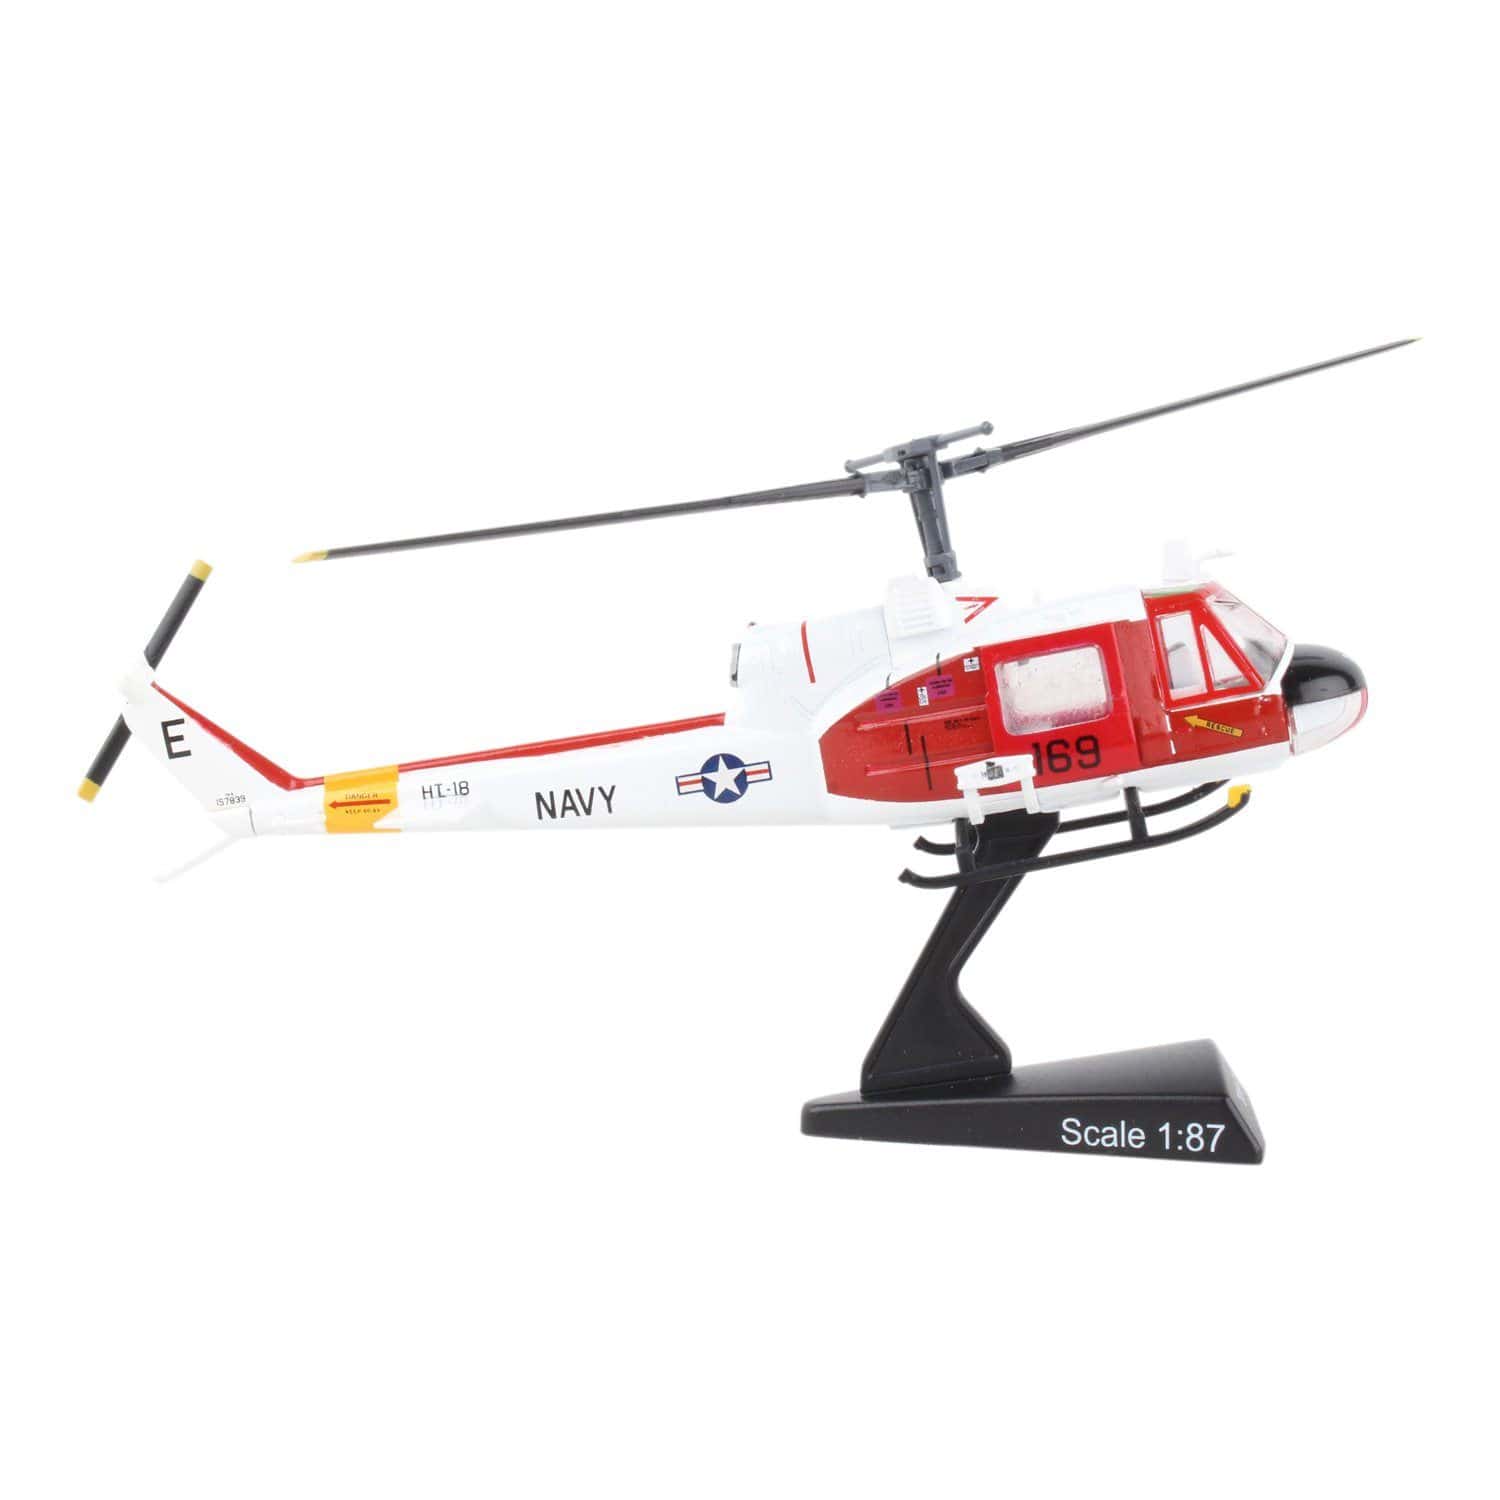 Postage Stamp US Navy TH-1L Iroquois 1/87 Die-Cast Metal Model Aircraft LIQUIDATION PRICING